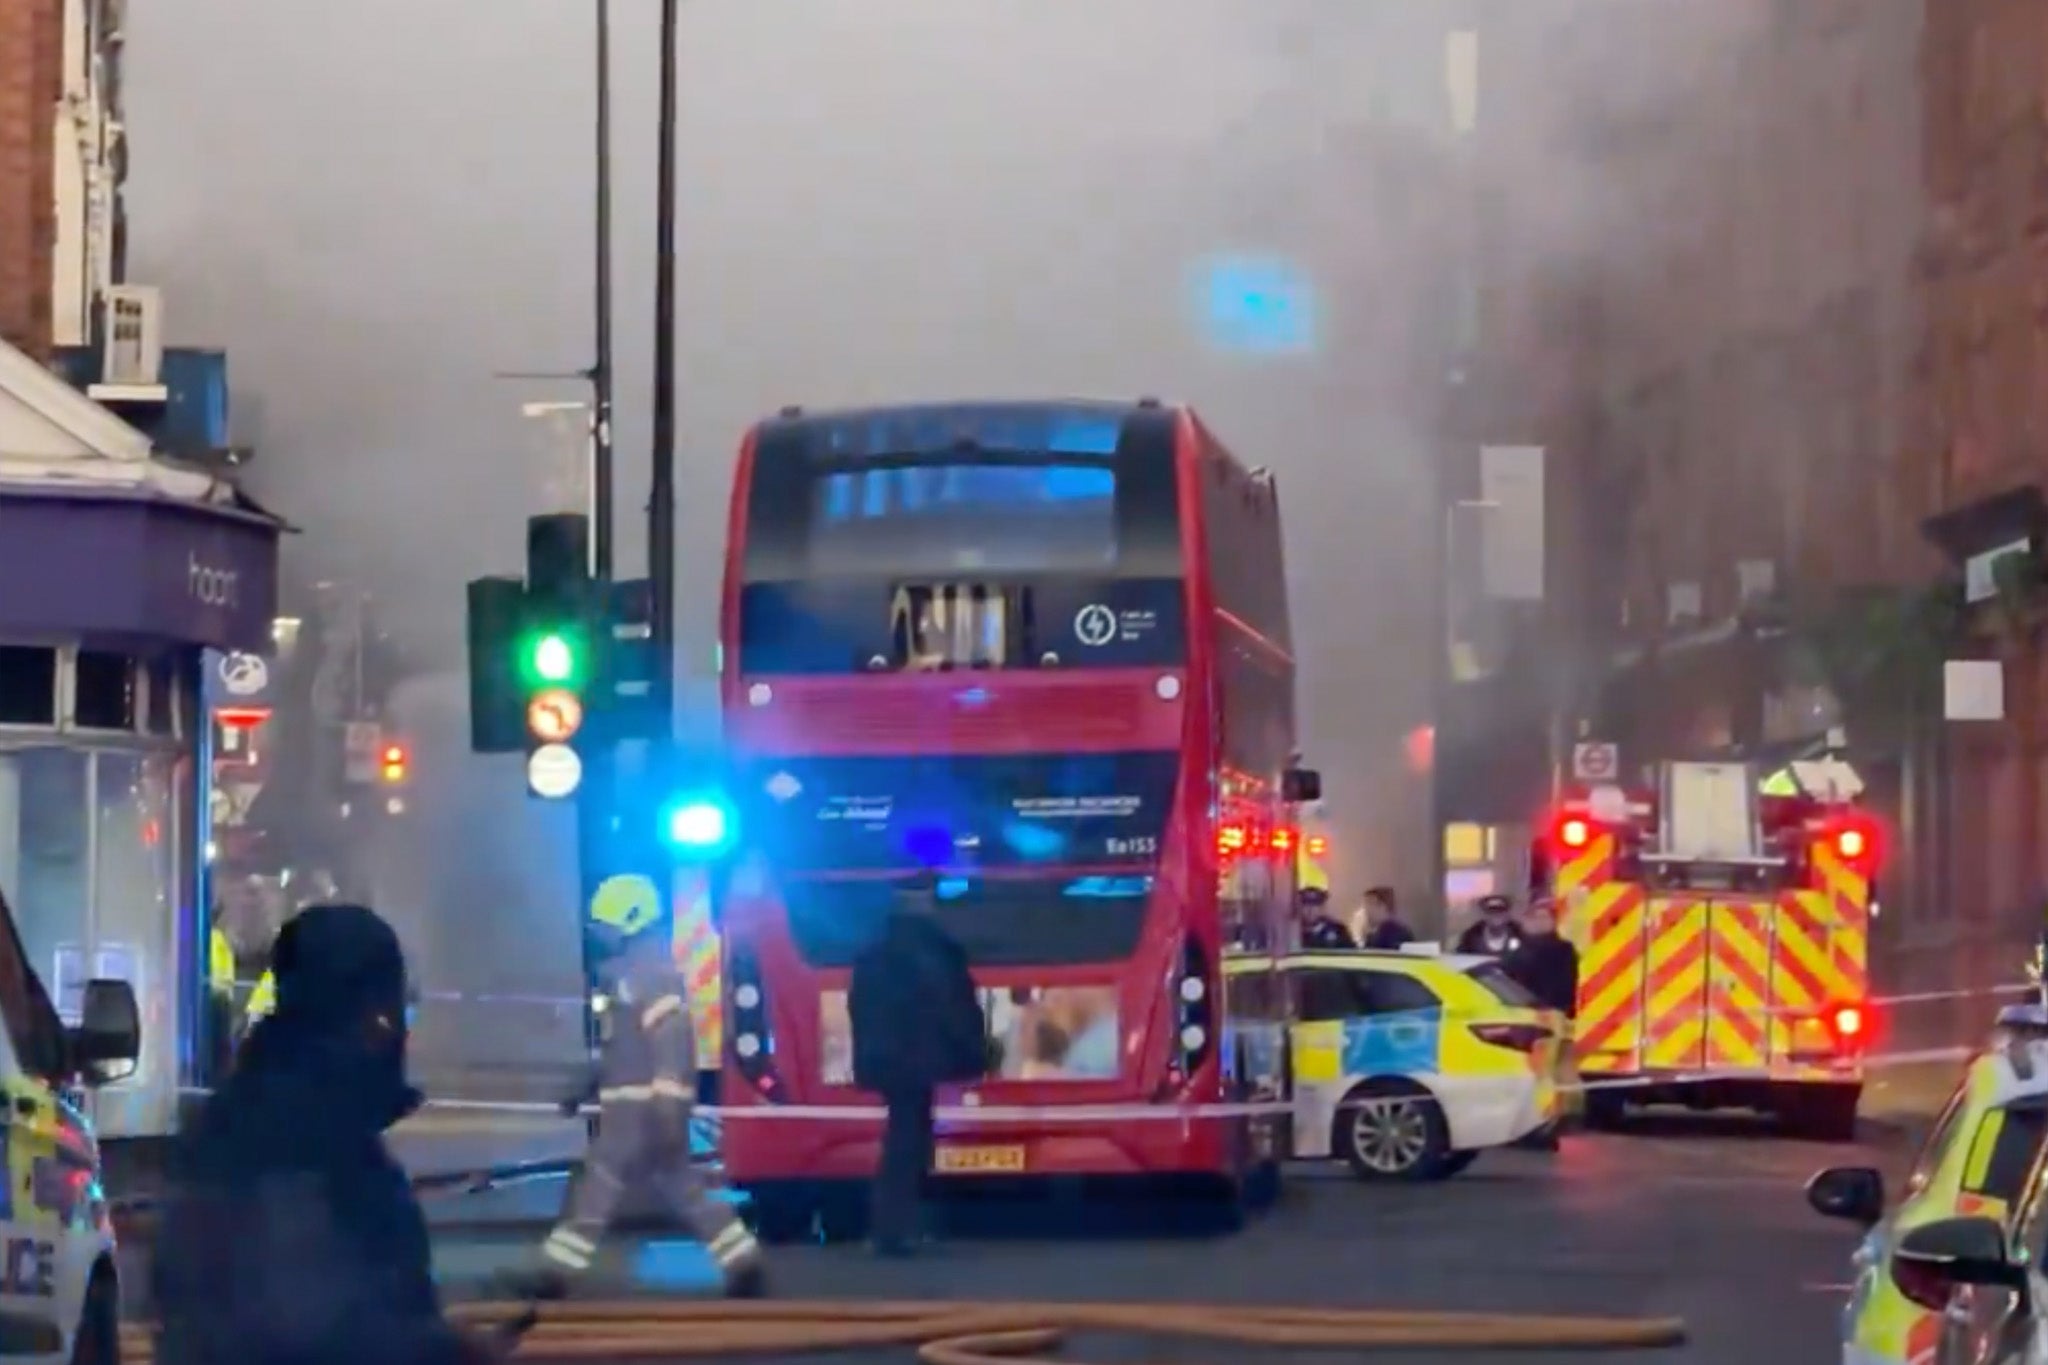 Witnesses described the dramatic scenes after the blaze broke out Wimbledon Hill Road shortly after 7.20am